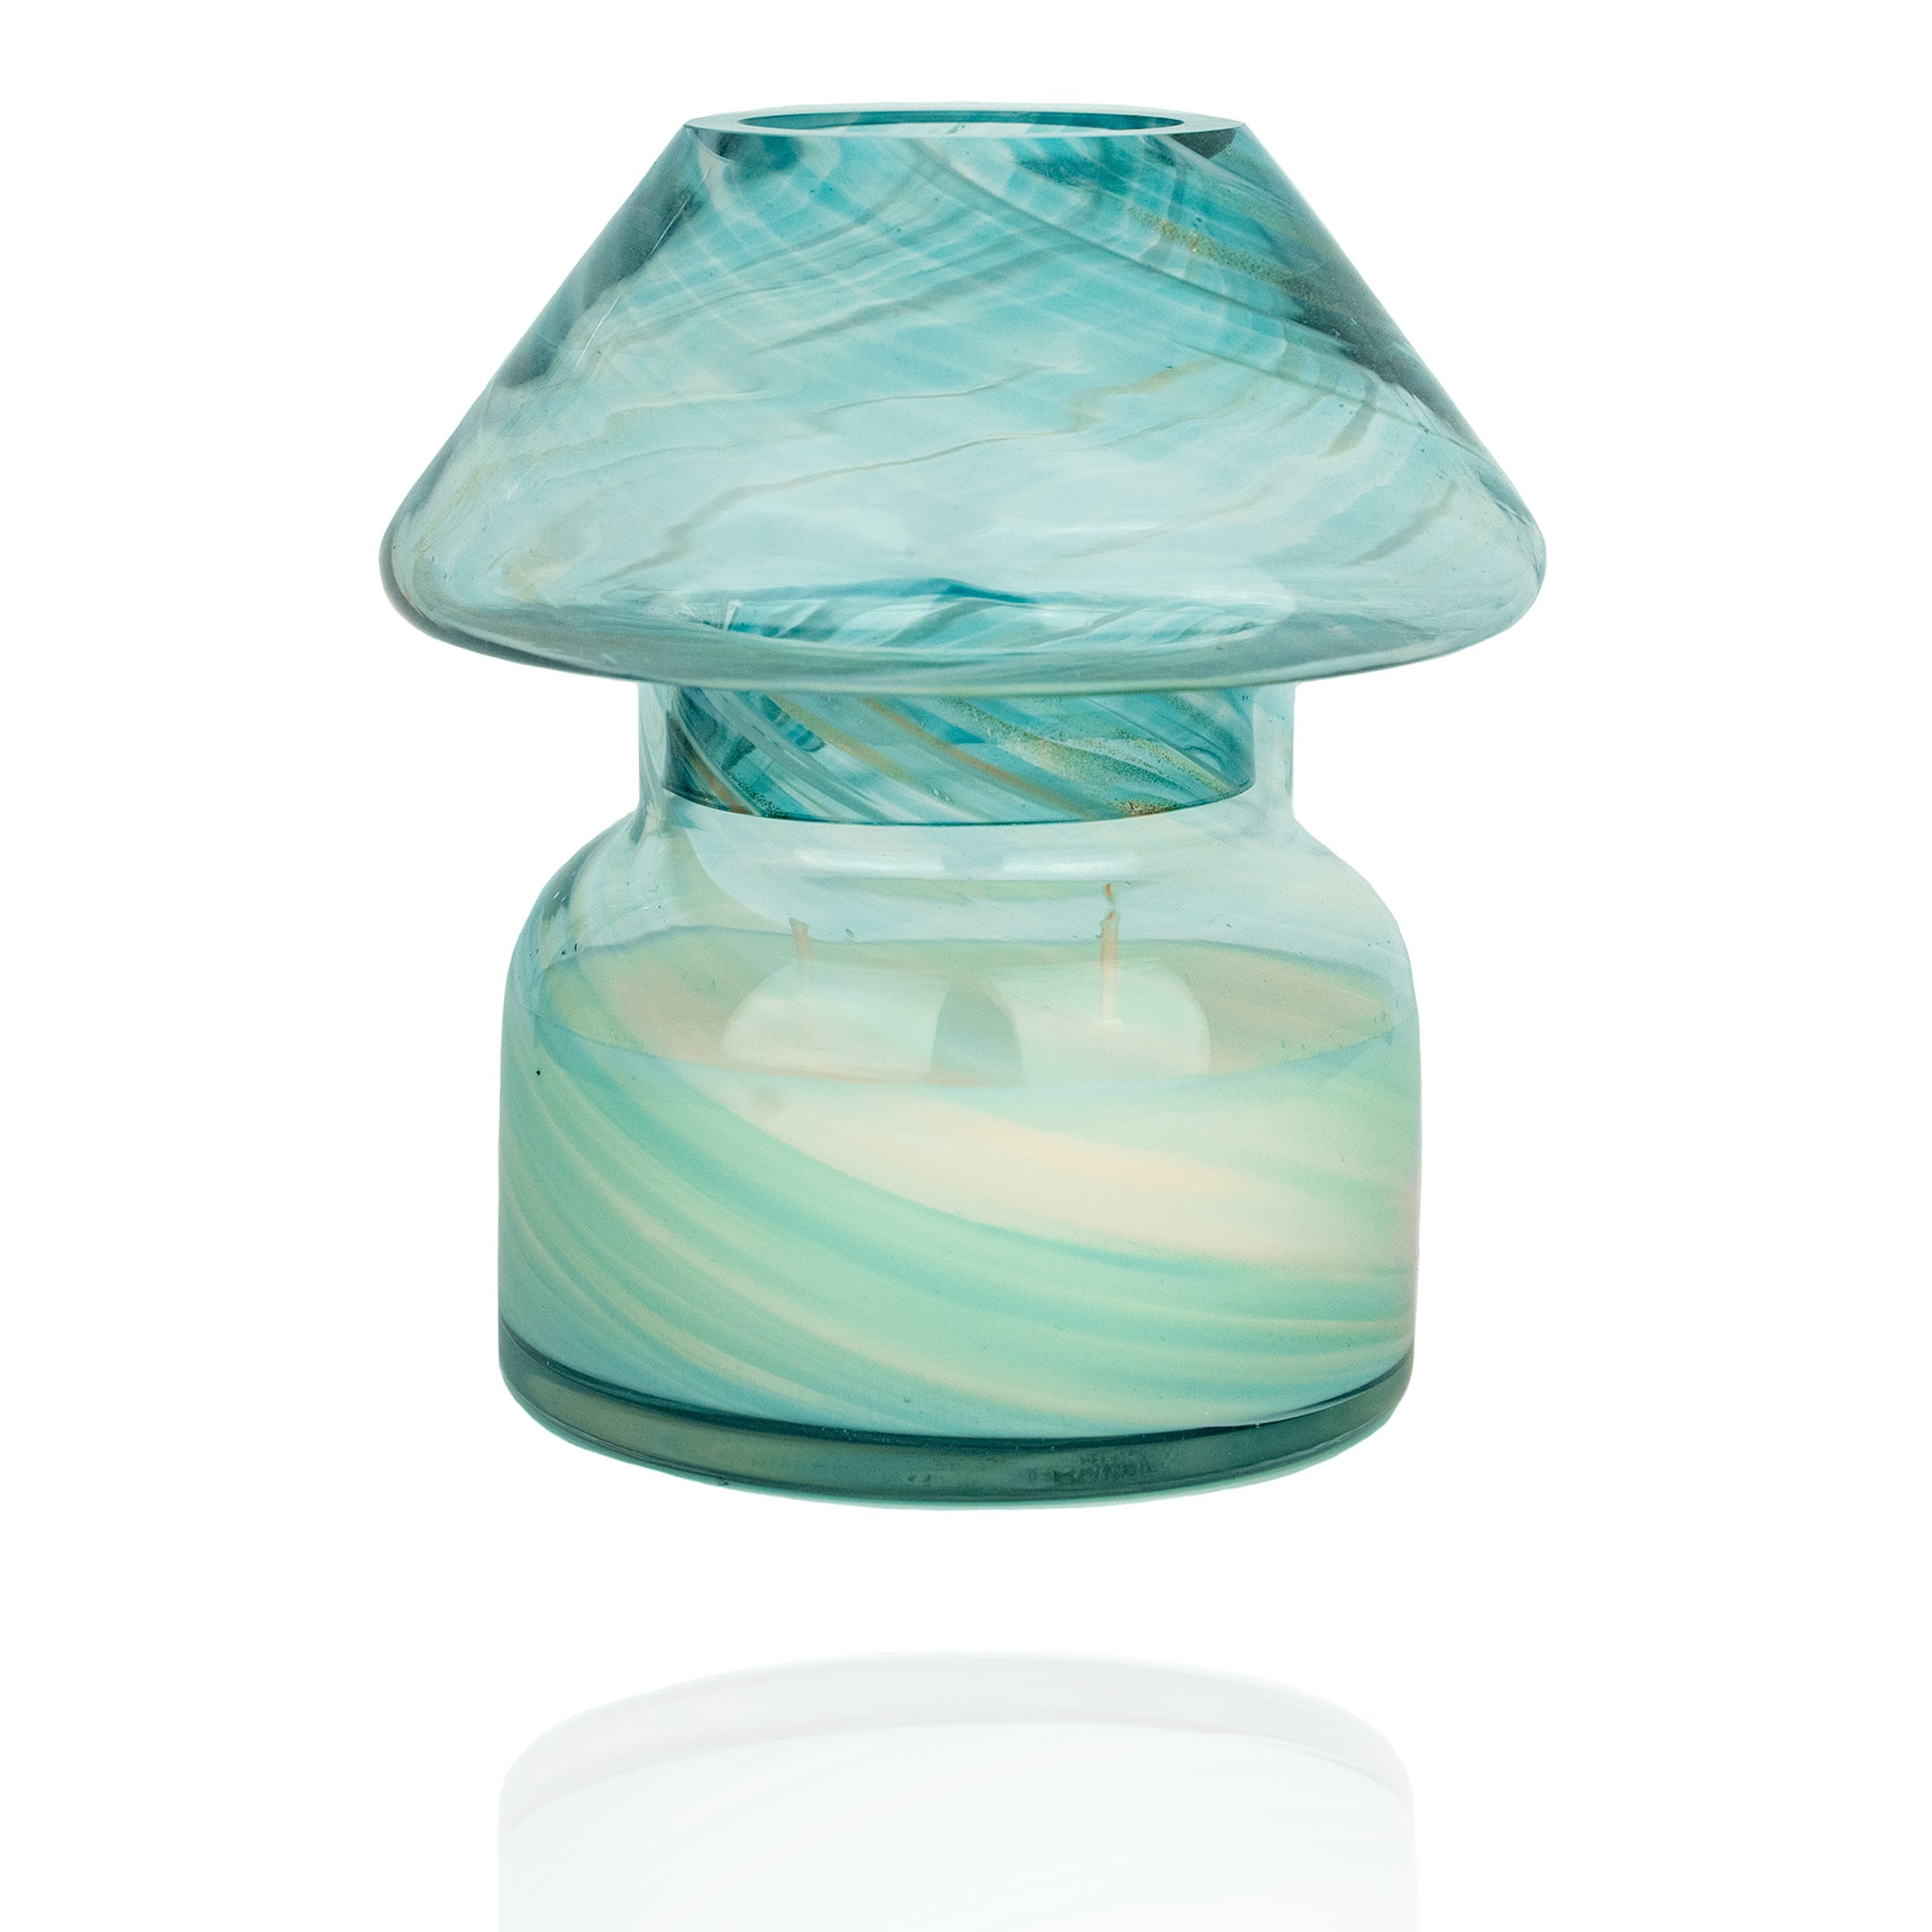 Mushroom candle lamp with aqua blue and gold glitter swirls on clear glass. Mushroom lamp is filled with 100% soy wax.